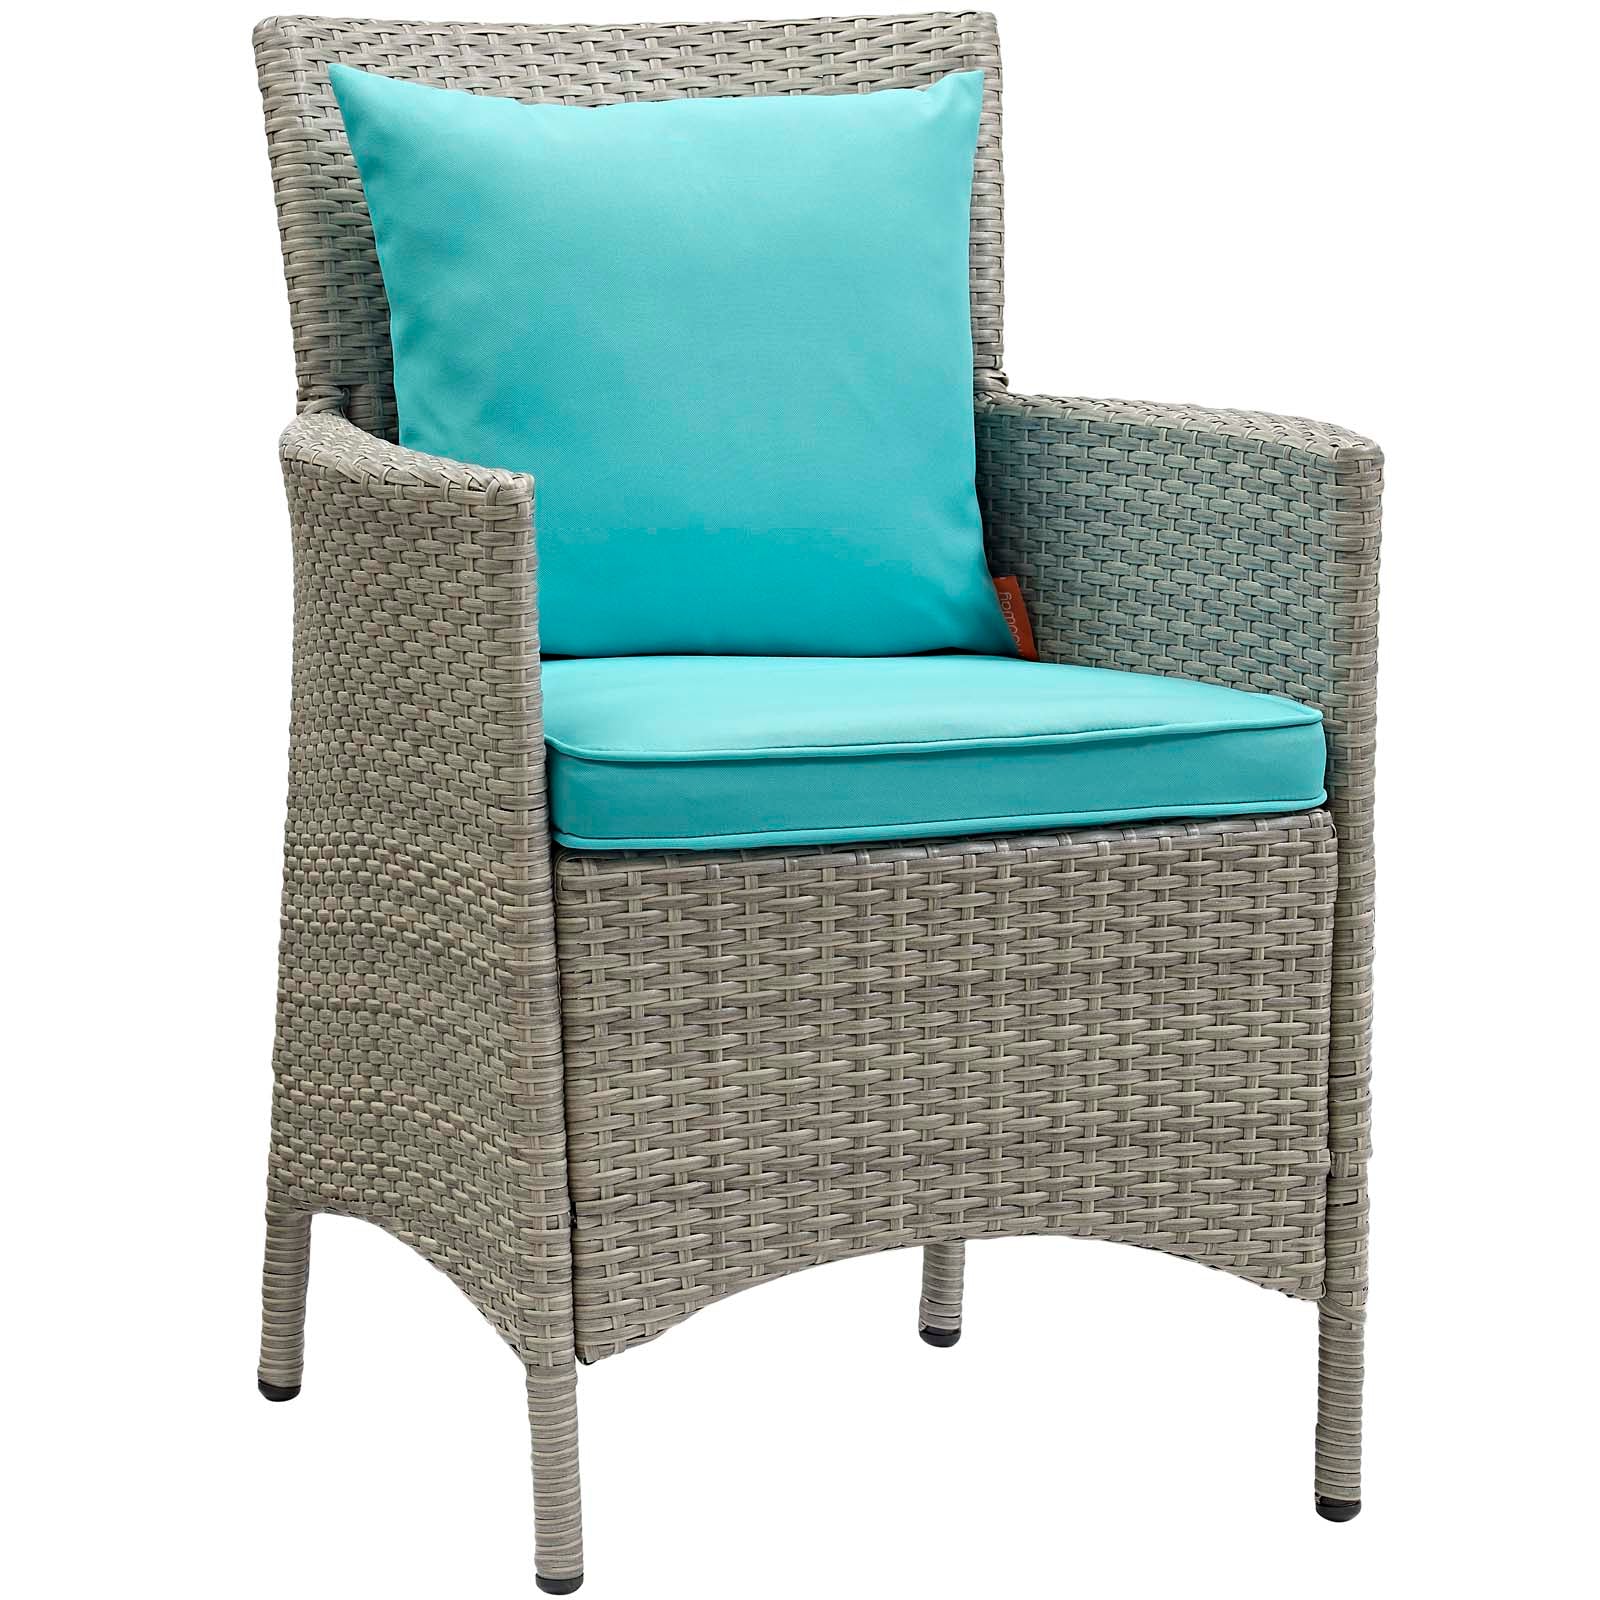 Modway Outdoor Dining Chairs - Conduit Outdoor Patio Wicker Rattan Dining Armchair Light Gray Turquoise